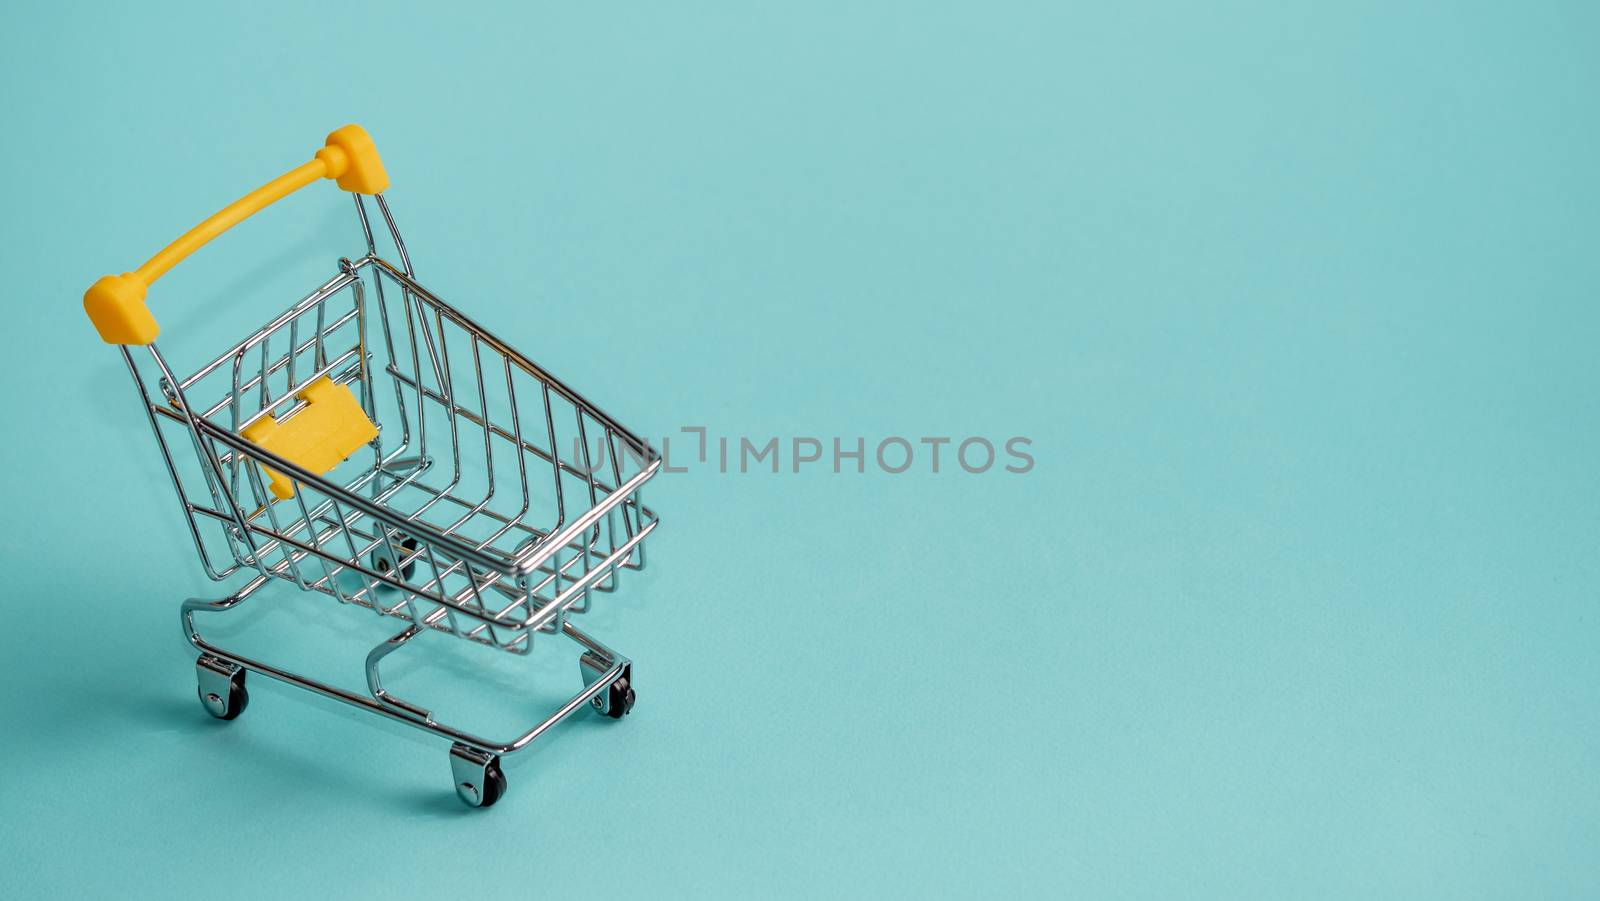 Shopping cart on blue background. Shop trolley at supermarket as sale, discount, shopaholism concept with copy space for text or design.